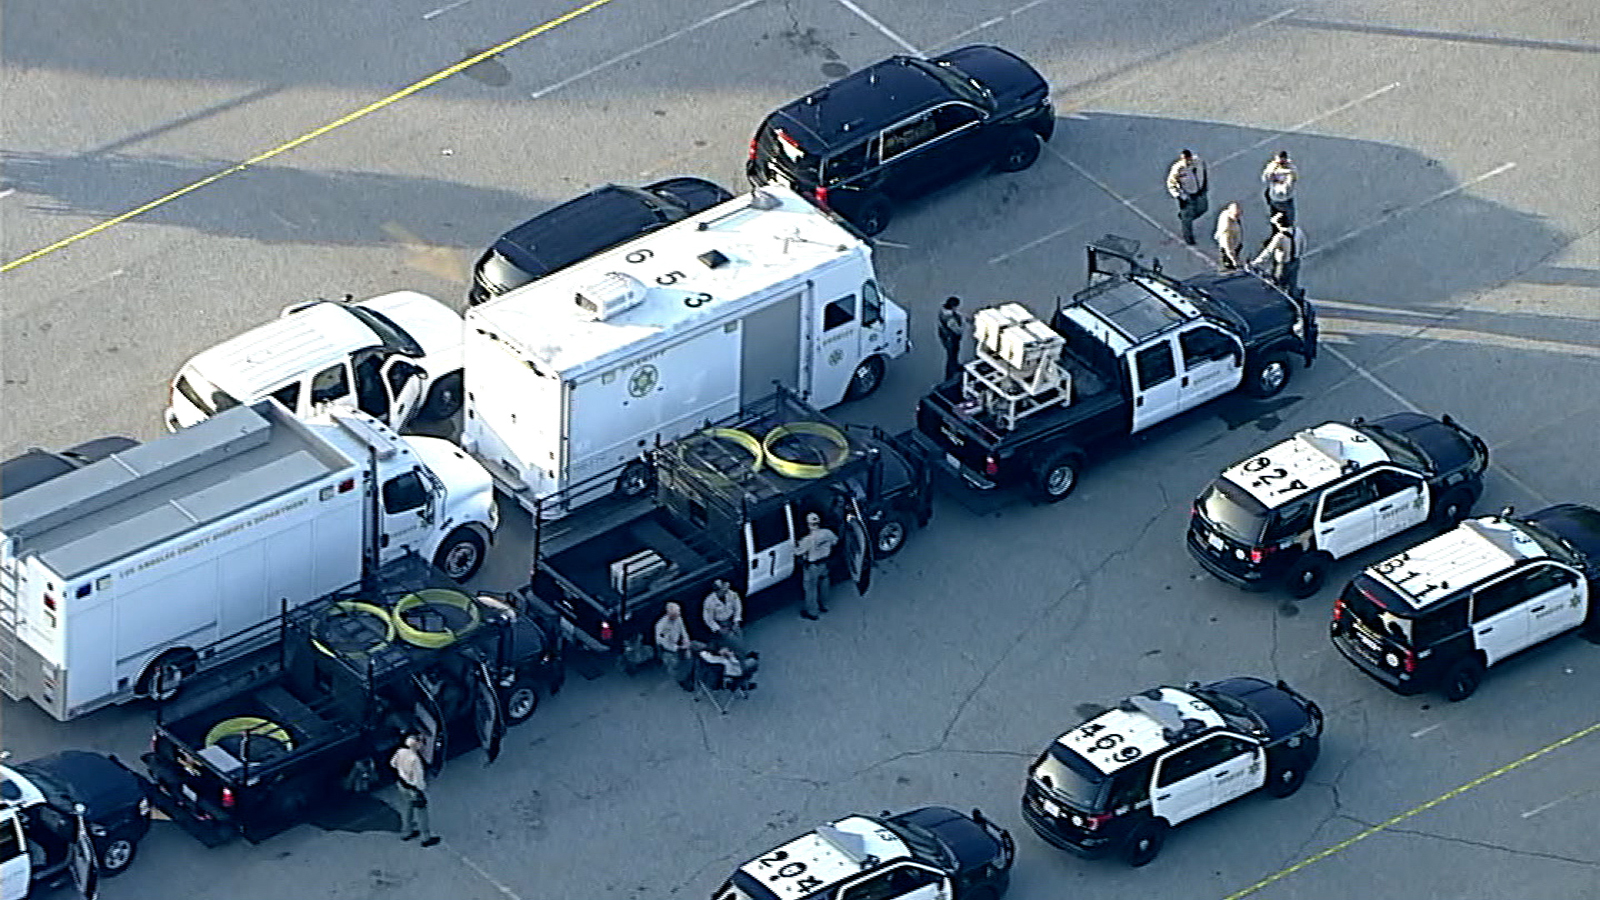 This aerial view shows police vehicles and a law enforcement mobile command post gathering at the FBI's Los Angeles field office parking lot in Loas Angeles, California.